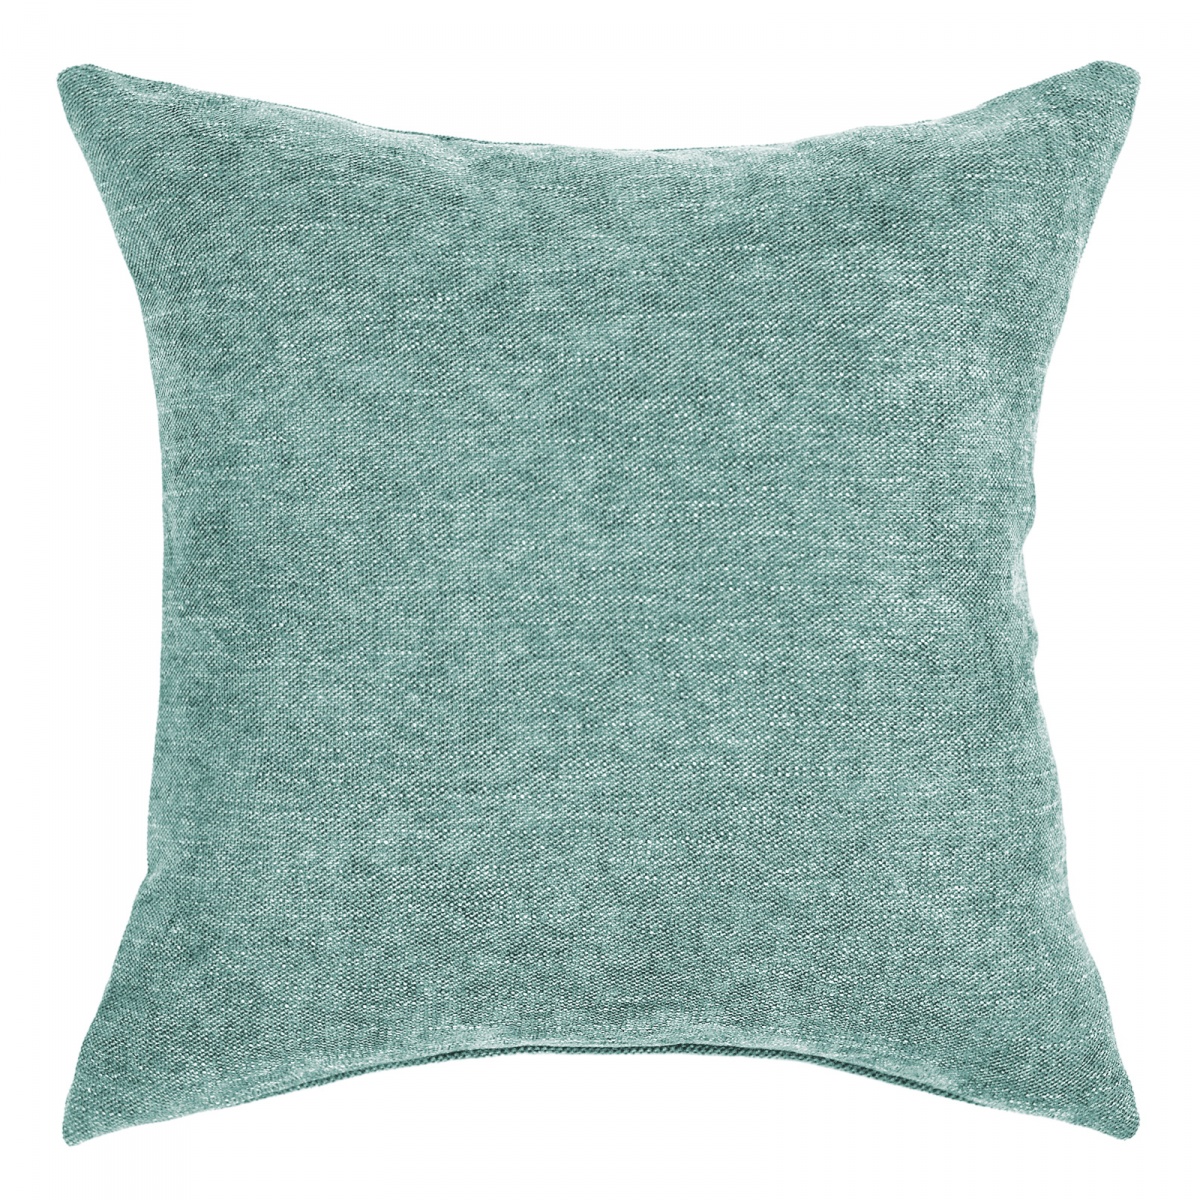 Liam Forget-me-not Cushion - 45x45cm